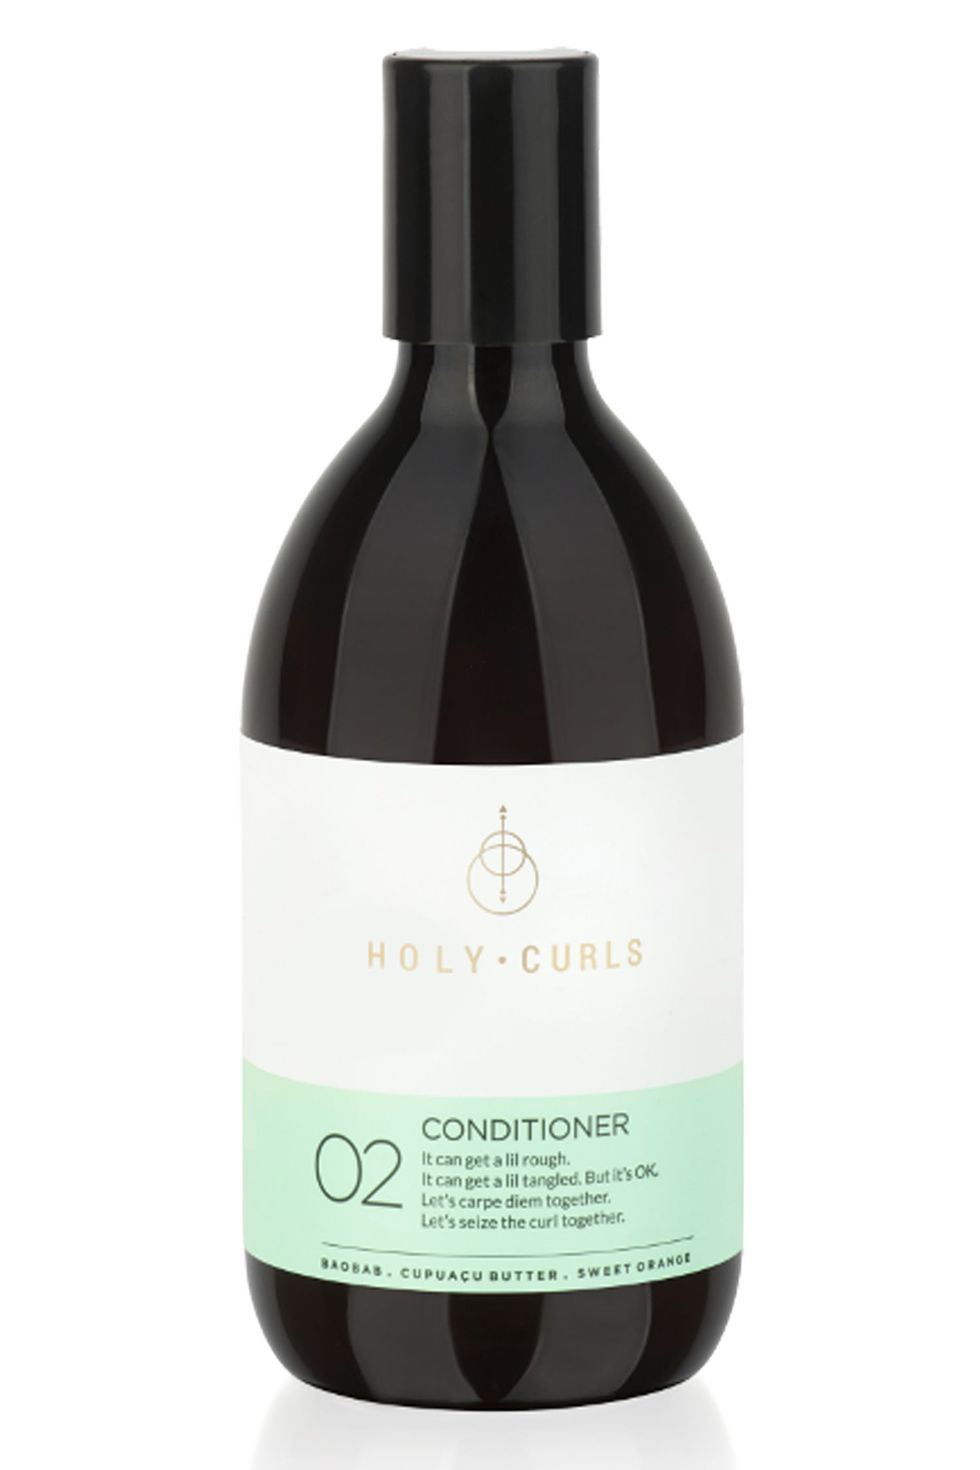 Holy Curls 02 Conditioner